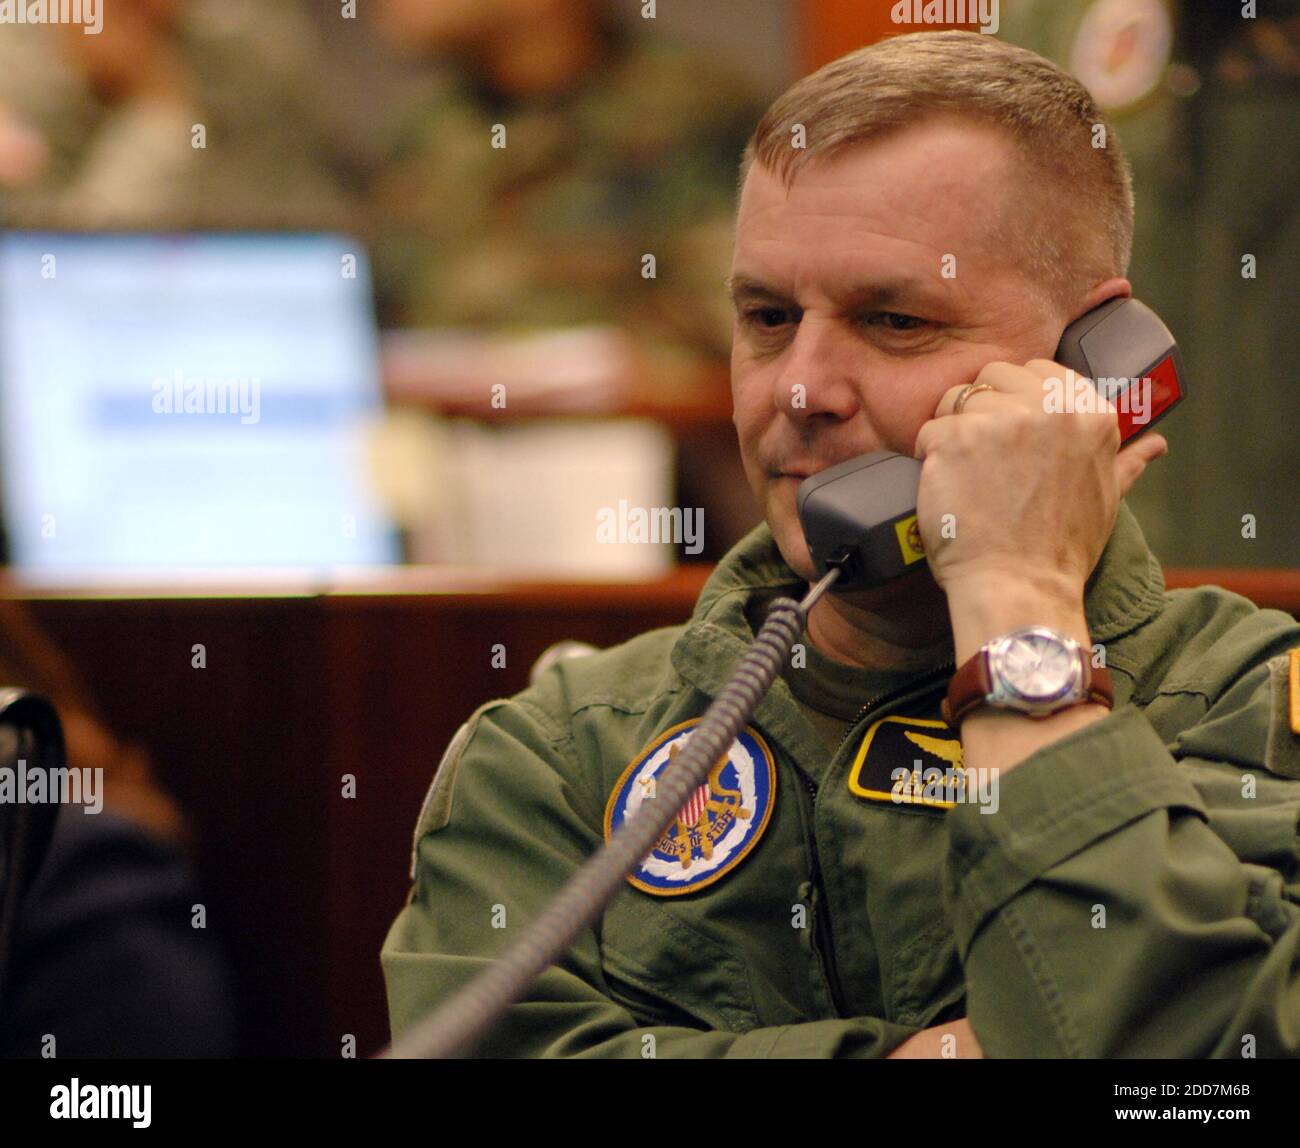 NO FILM, NO VIDEO, NO TV, NO DOCUMENTARY - Vice Chairman of the Joint Chiefs of Staff Gen. James E. Cartwright, U.S. Marine Corps, informs Secretary of Defense Robert Gates of the successful missile intercept from the Pentagon's National Military Command Center on February 20, 2008. The USS Lake Erie (CG 70) launched the missile at the satellite as it orbited in space at more than 17,000 mph over the Pacific. Photo by US Navy News Photo/MCT/ABACAPRESS.COM Stock Photo